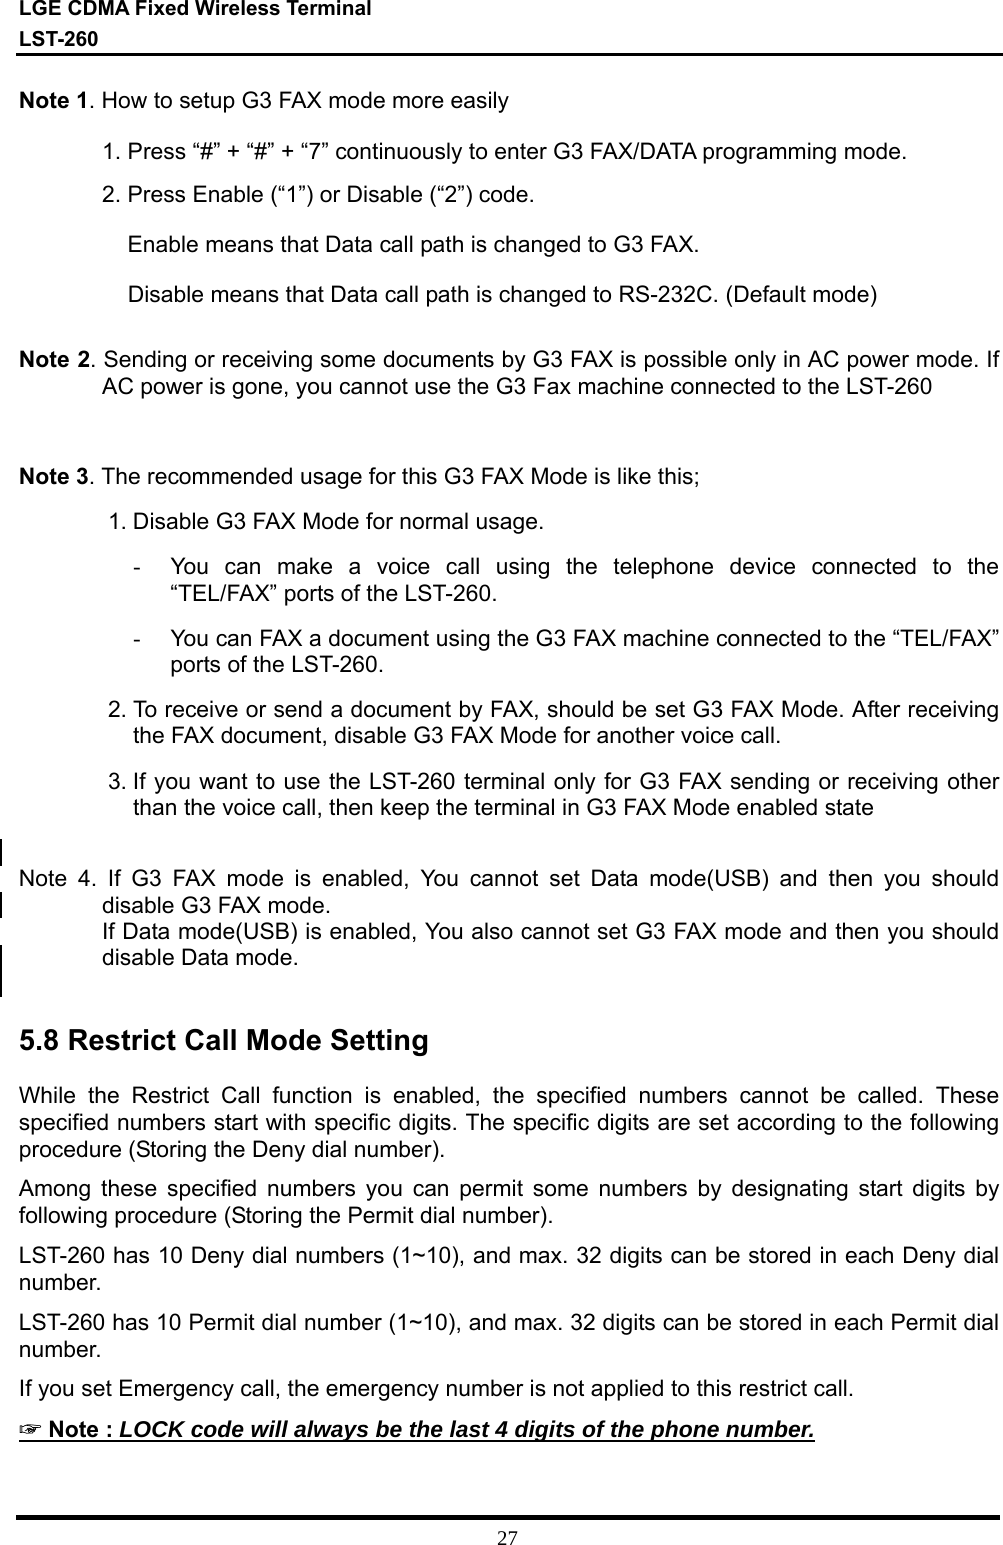 LGE CDMA Fixed Wireless Terminal LST-260         27 Note 1. How to setup G3 FAX mode more easily 1. Press “#” + “#” + “7” continuously to enter G3 FAX/DATA programming mode. 2. Press Enable (“1”) or Disable (“2”) code.     Enable means that Data call path is changed to G3 FAX.     Disable means that Data call path is changed to RS-232C. (Default mode)  Note 2. Sending or receiving some documents by G3 FAX is possible only in AC power mode. If AC power is gone, you cannot use the G3 Fax machine connected to the LST-260   Note 3. The recommended usage for this G3 FAX Mode is like this; 1. Disable G3 FAX Mode for normal usage. -  You can make a voice call using the telephone device connected to the “TEL/FAX” ports of the LST-260. -  You can FAX a document using the G3 FAX machine connected to the “TEL/FAX” ports of the LST-260. 2. To receive or send a document by FAX, should be set G3 FAX Mode. After receiving the FAX document, disable G3 FAX Mode for another voice call. 3. If you want to use the LST-260 terminal only for G3 FAX sending or receiving other than the voice call, then keep the terminal in G3 FAX Mode enabled state  Note 4. If G3 FAX mode is enabled, You cannot set Data mode(USB) and then you should disable G3 FAX mode. If Data mode(USB) is enabled, You also cannot set G3 FAX mode and then you should disable Data mode.   5.8 Restrict Call Mode Setting  While the Restrict Call function is enabled, the specified numbers cannot be called. These specified numbers start with specific digits. The specific digits are set according to the following procedure (Storing the Deny dial number).  Among these specified numbers you can permit some numbers by designating start digits by following procedure (Storing the Permit dial number). LST-260 has 10 Deny dial numbers (1~10), and max. 32 digits can be stored in each Deny dial number. LST-260 has 10 Permit dial number (1~10), and max. 32 digits can be stored in each Permit dial number. If you set Emergency call, the emergency number is not applied to this restrict call.  ☞ Note : LOCK code will always be the last 4 digits of the phone number. 